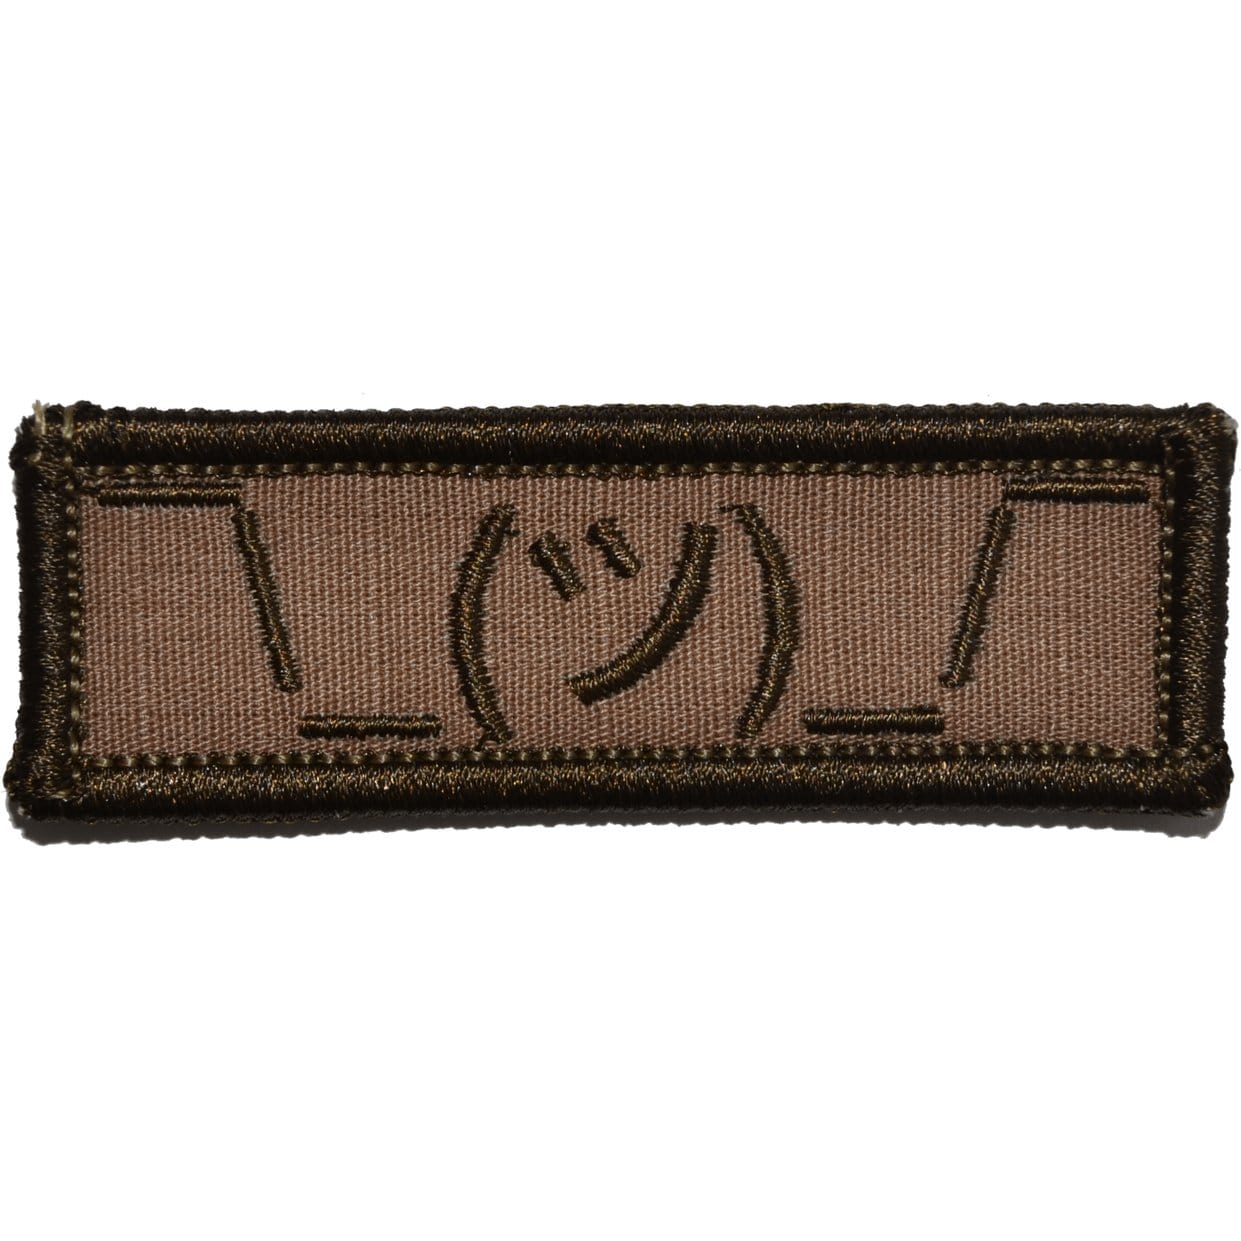 Tactical Gear Junkie Patches Coyote Brown Shrug Emoji - 1x3 Patch